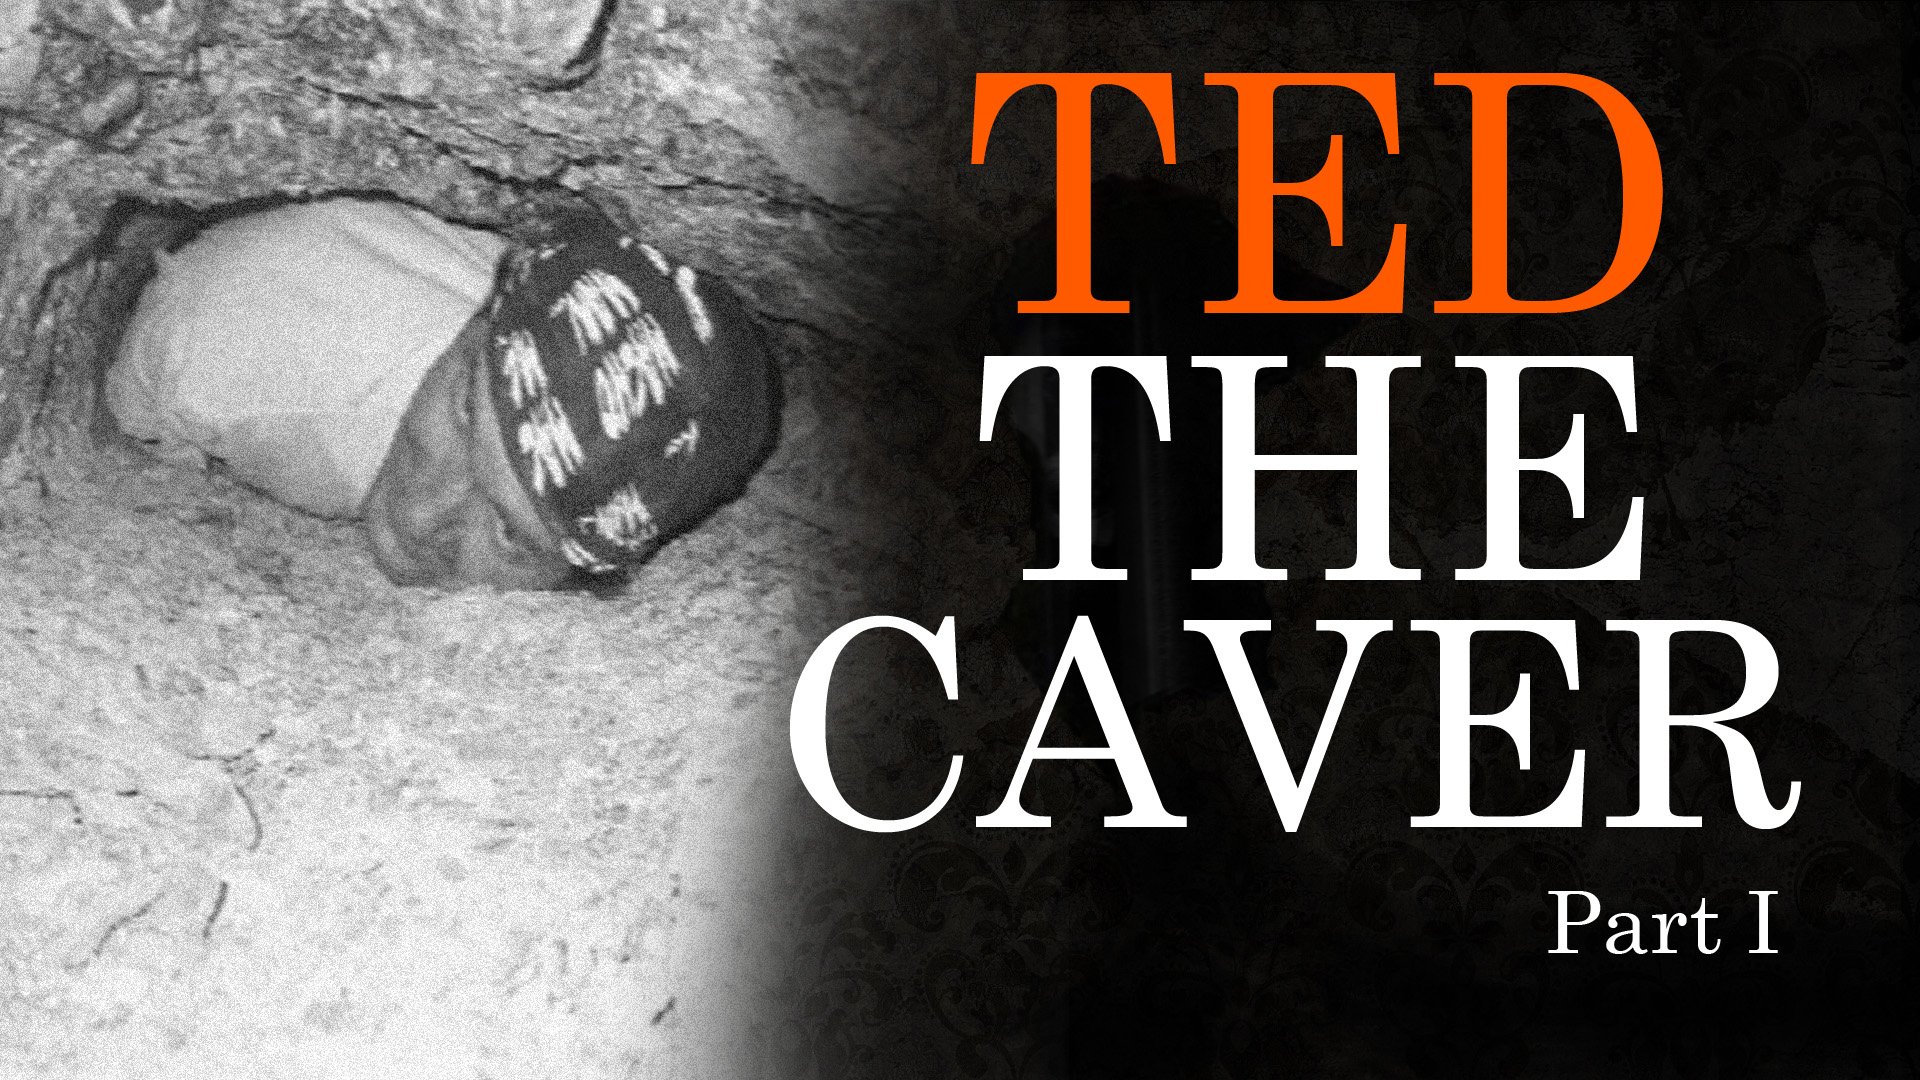 Ted the caver